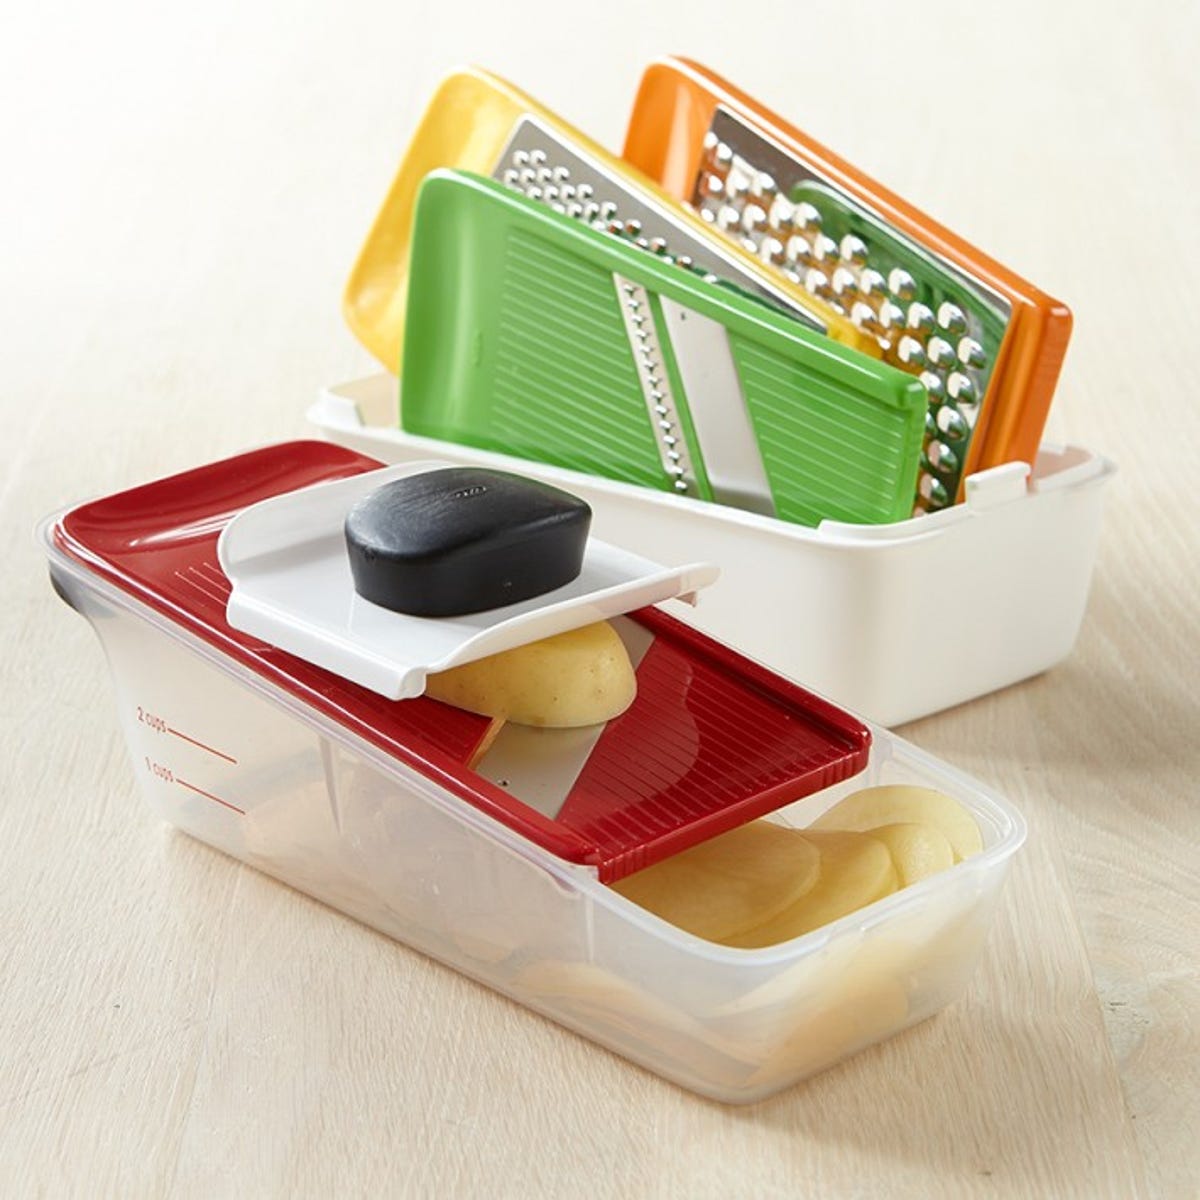 Put the family to work with the OXO Good Grips Complete Grate & Slice Set.